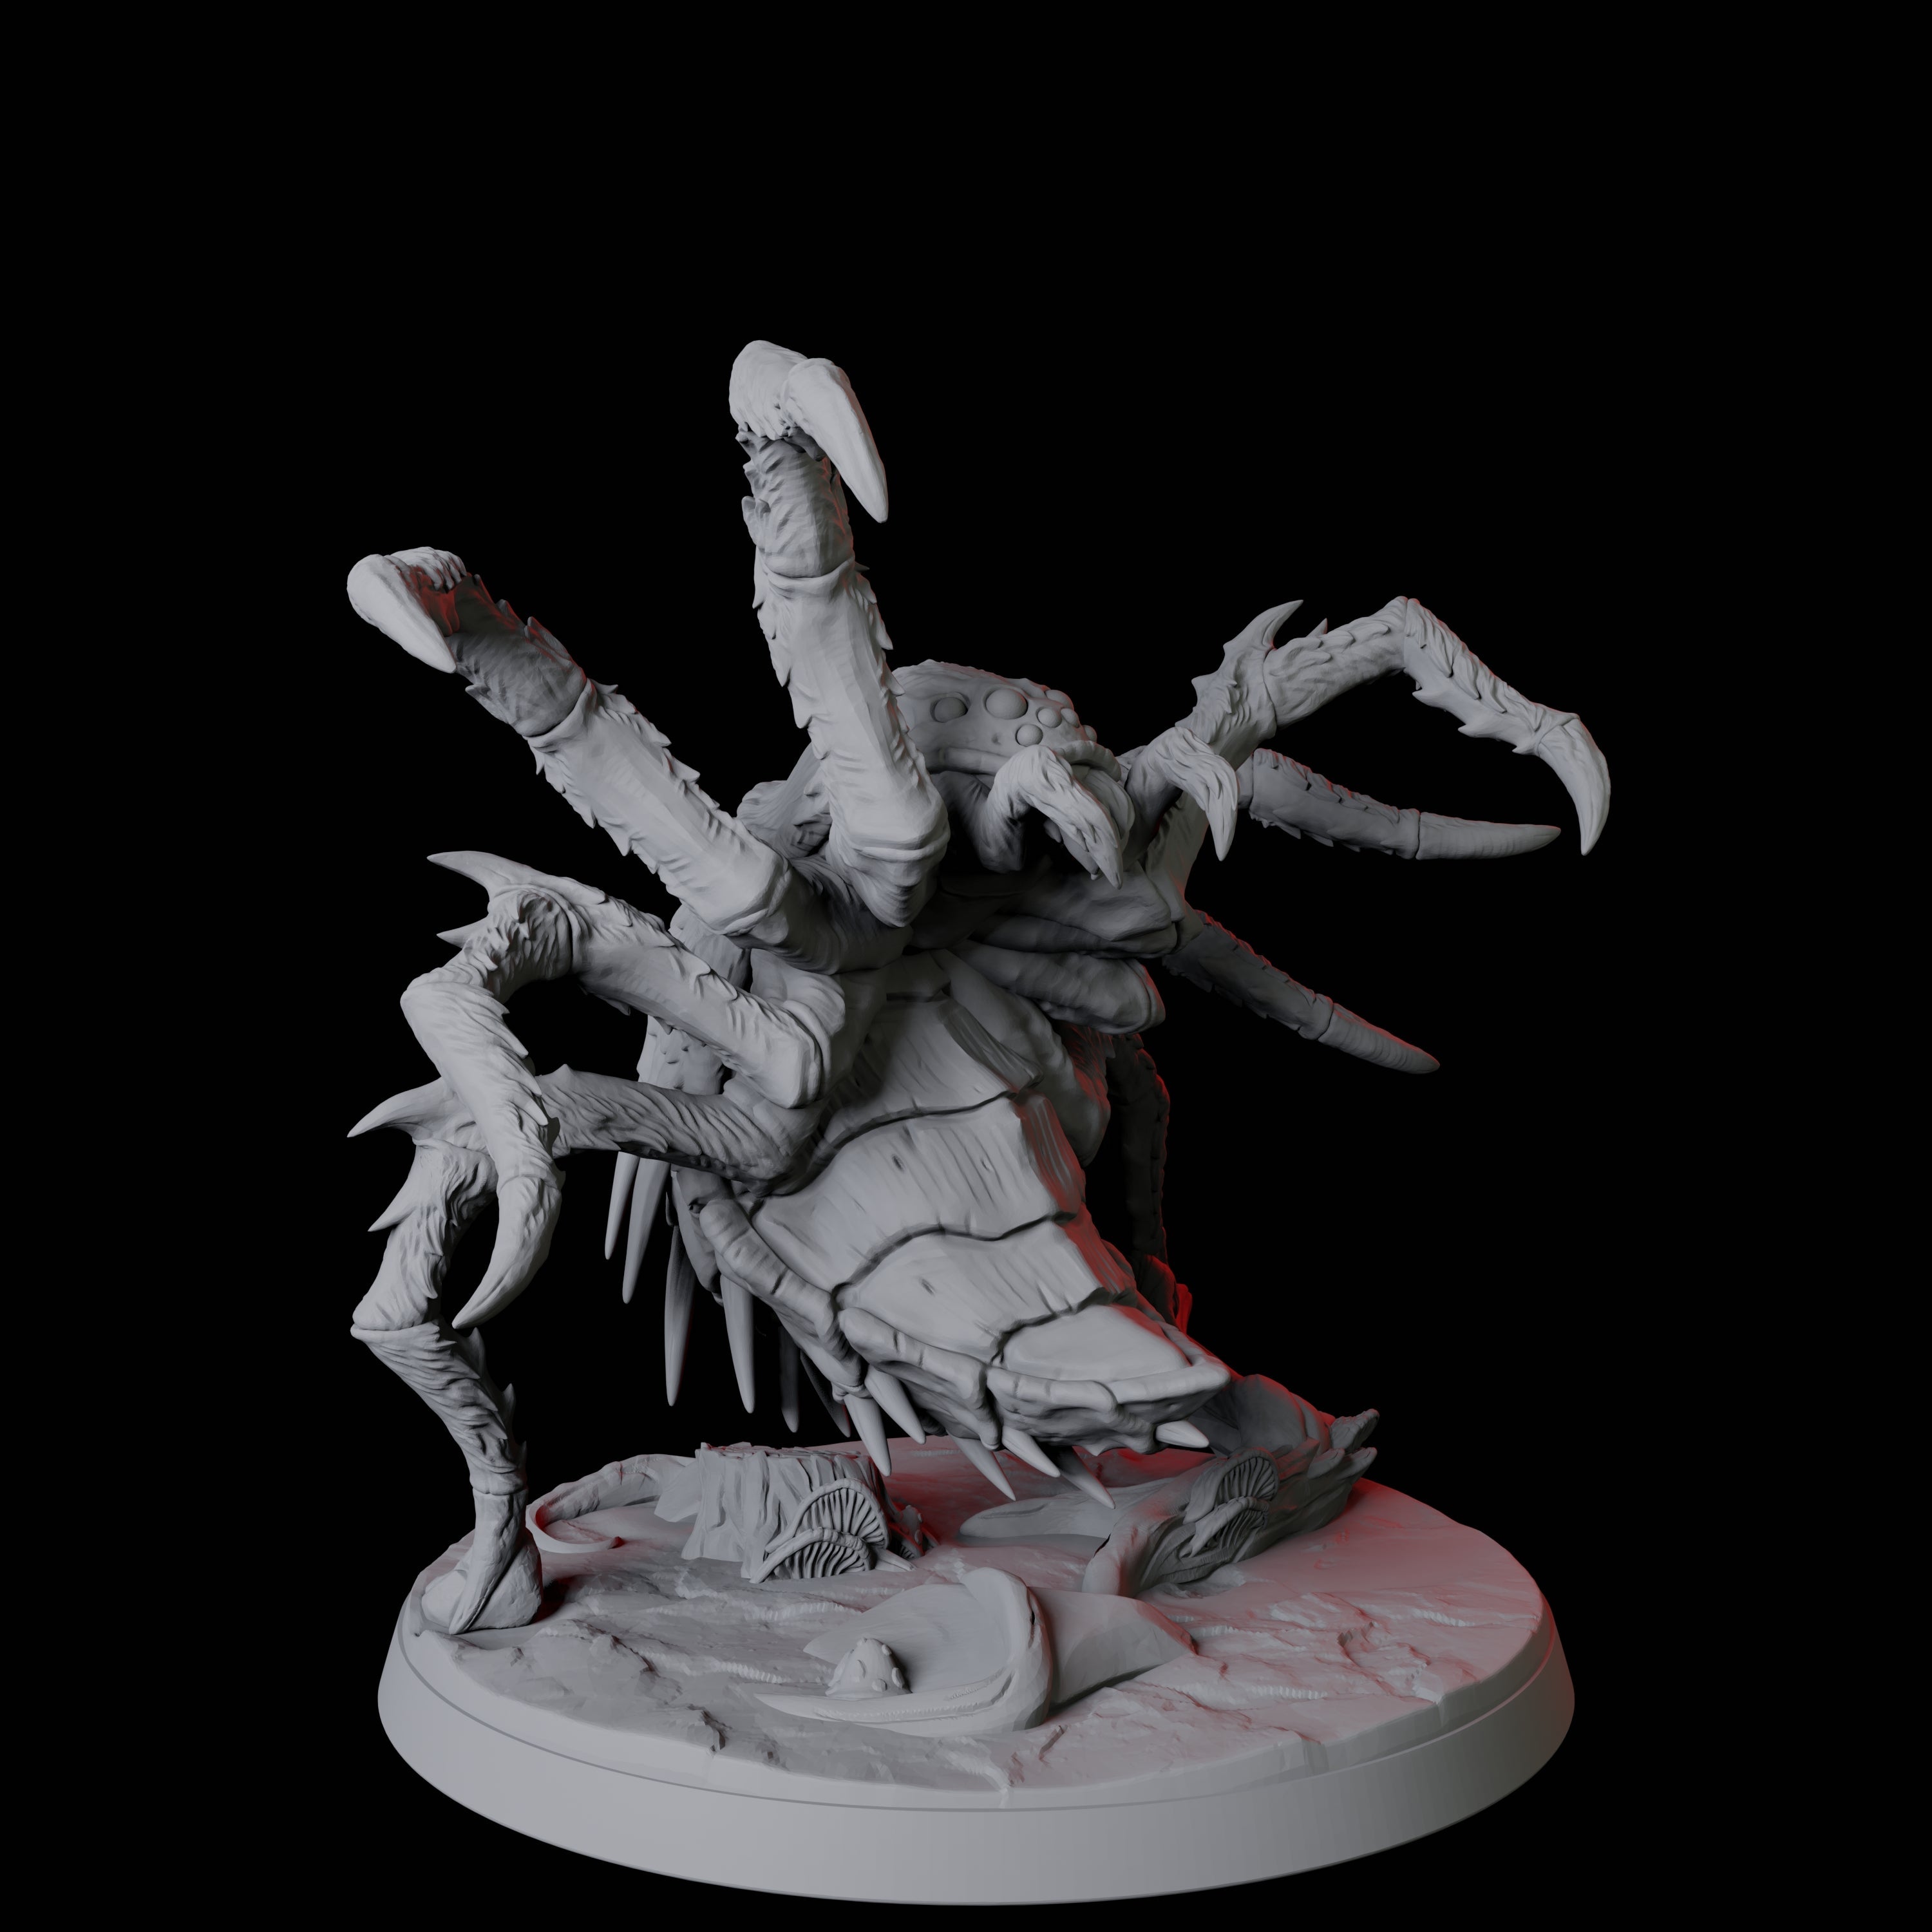 Four Creeping Giant Spiders Miniature for Dungeons and Dragons, Pathfinder or other TTRPGs